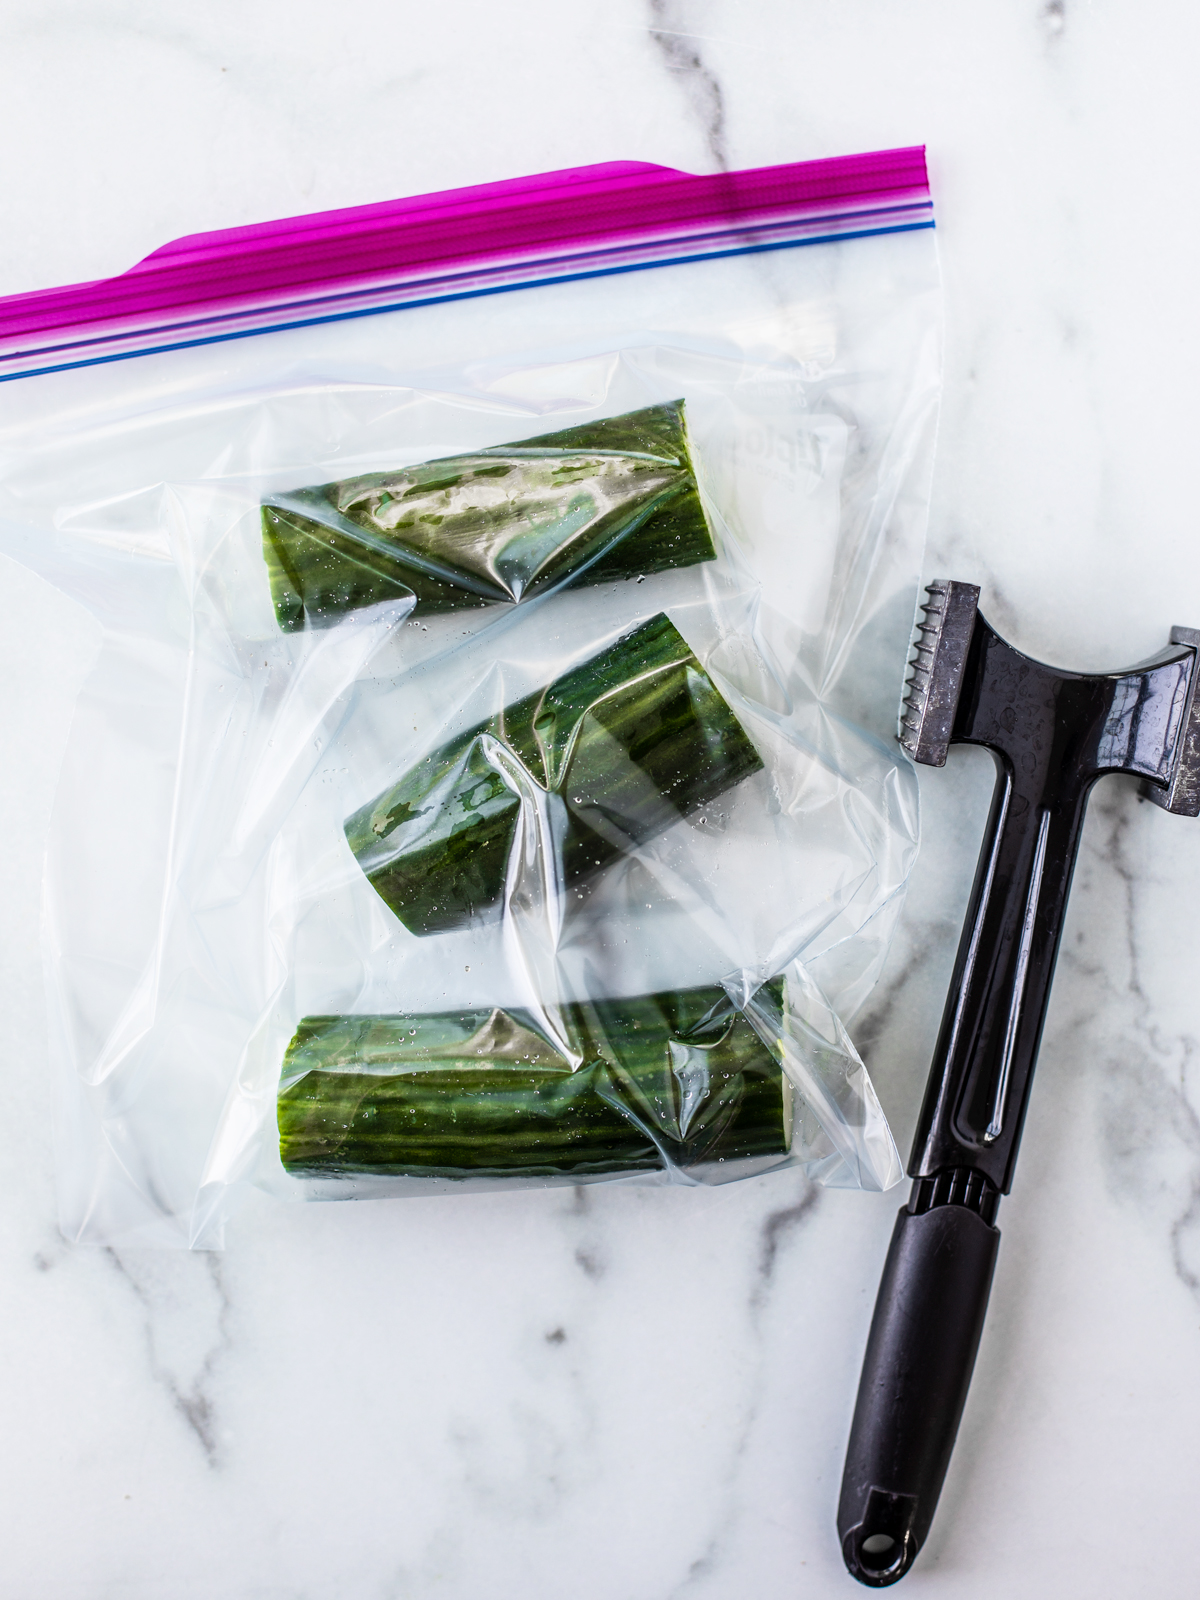 Three cucumber pieces in a freezer bag next to a meat mallet.